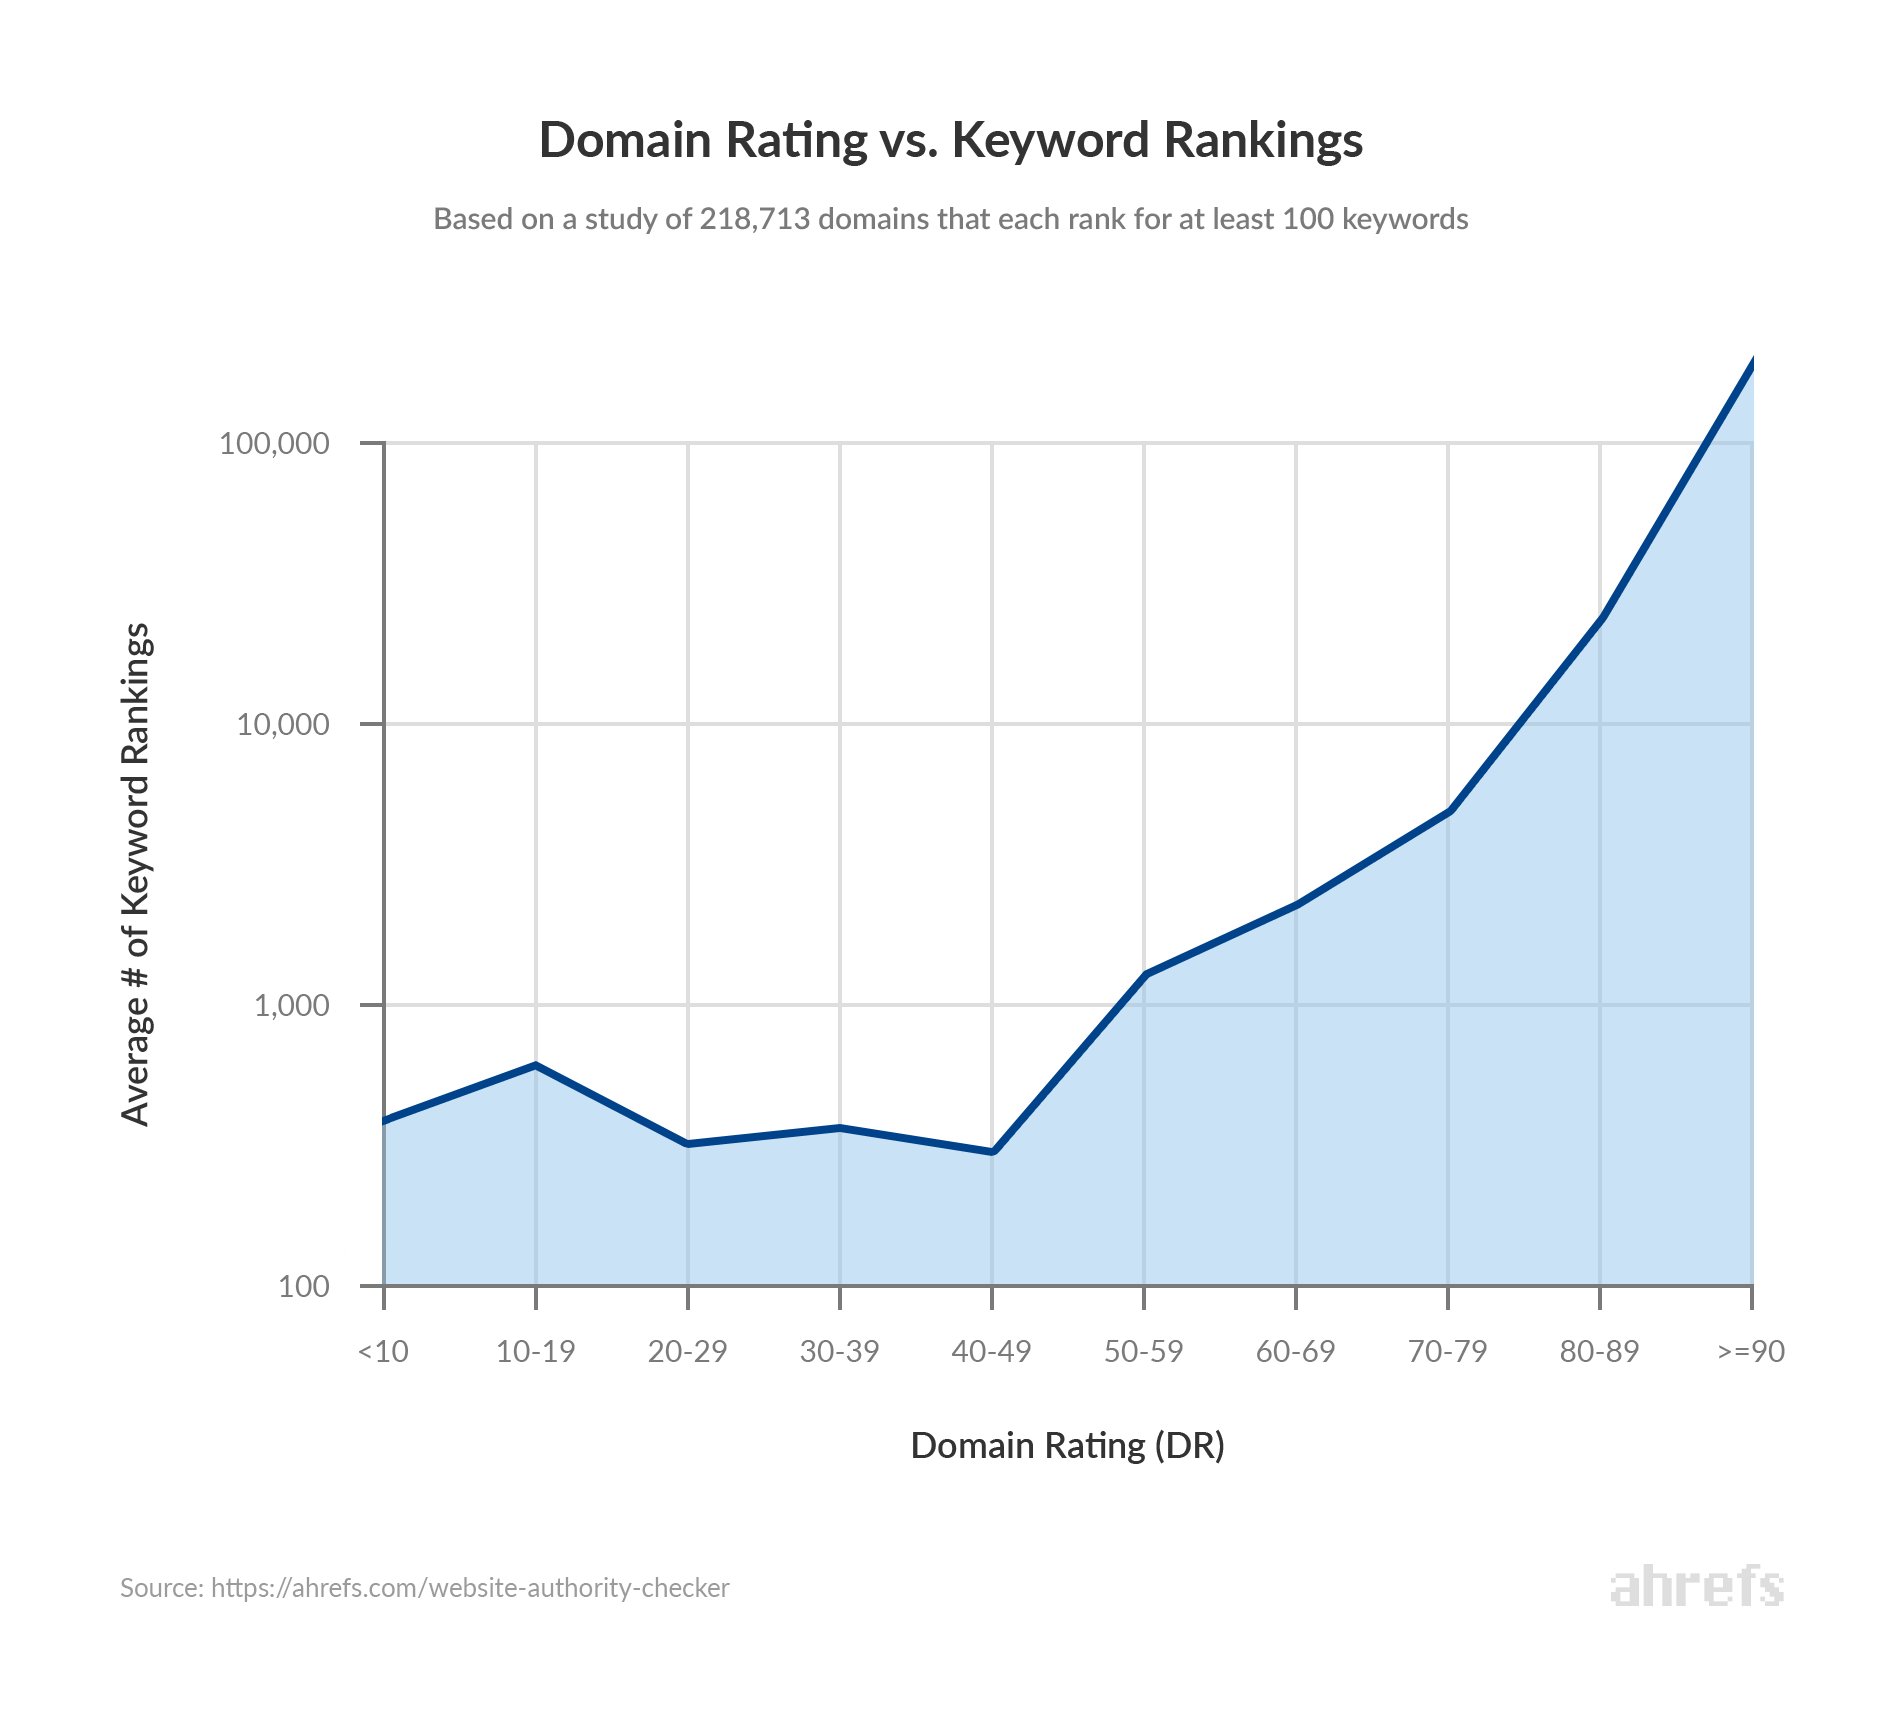 Ahrefs' study of 218,713 domains found a clear correlation between keyword rankings and Domain Rating, Source: Ahrefs.com